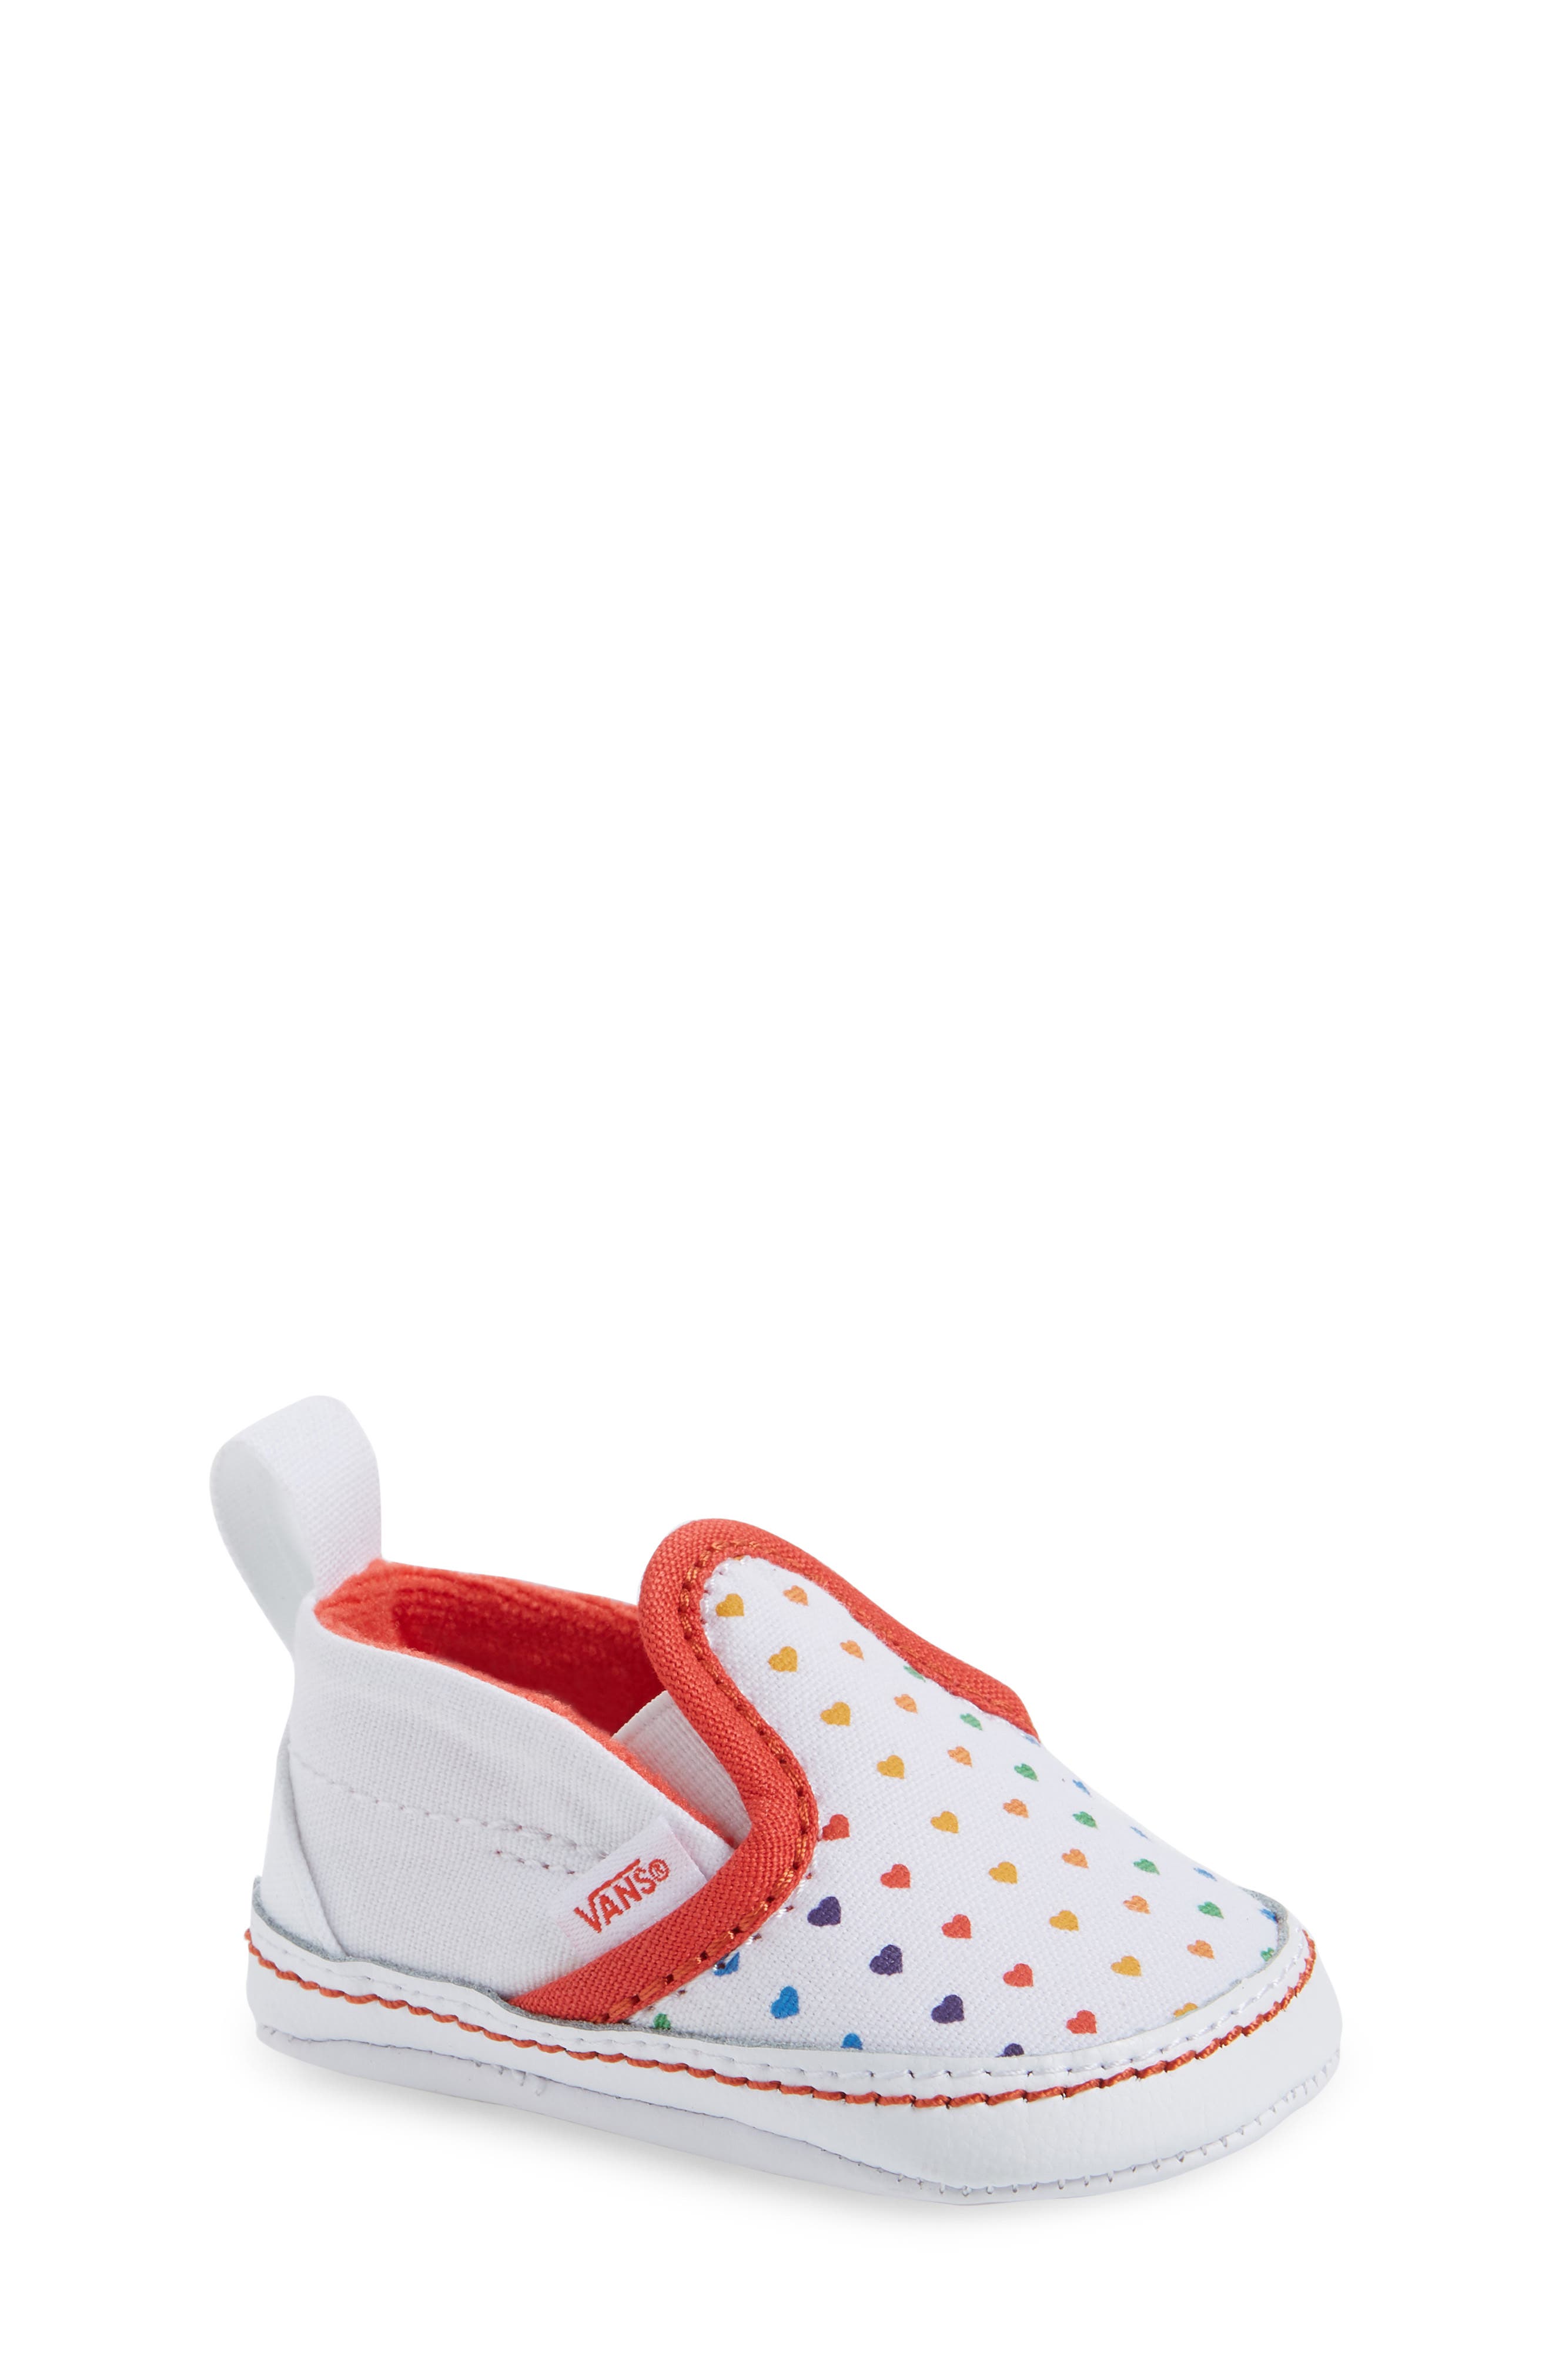 nordstrom baby girl shoes